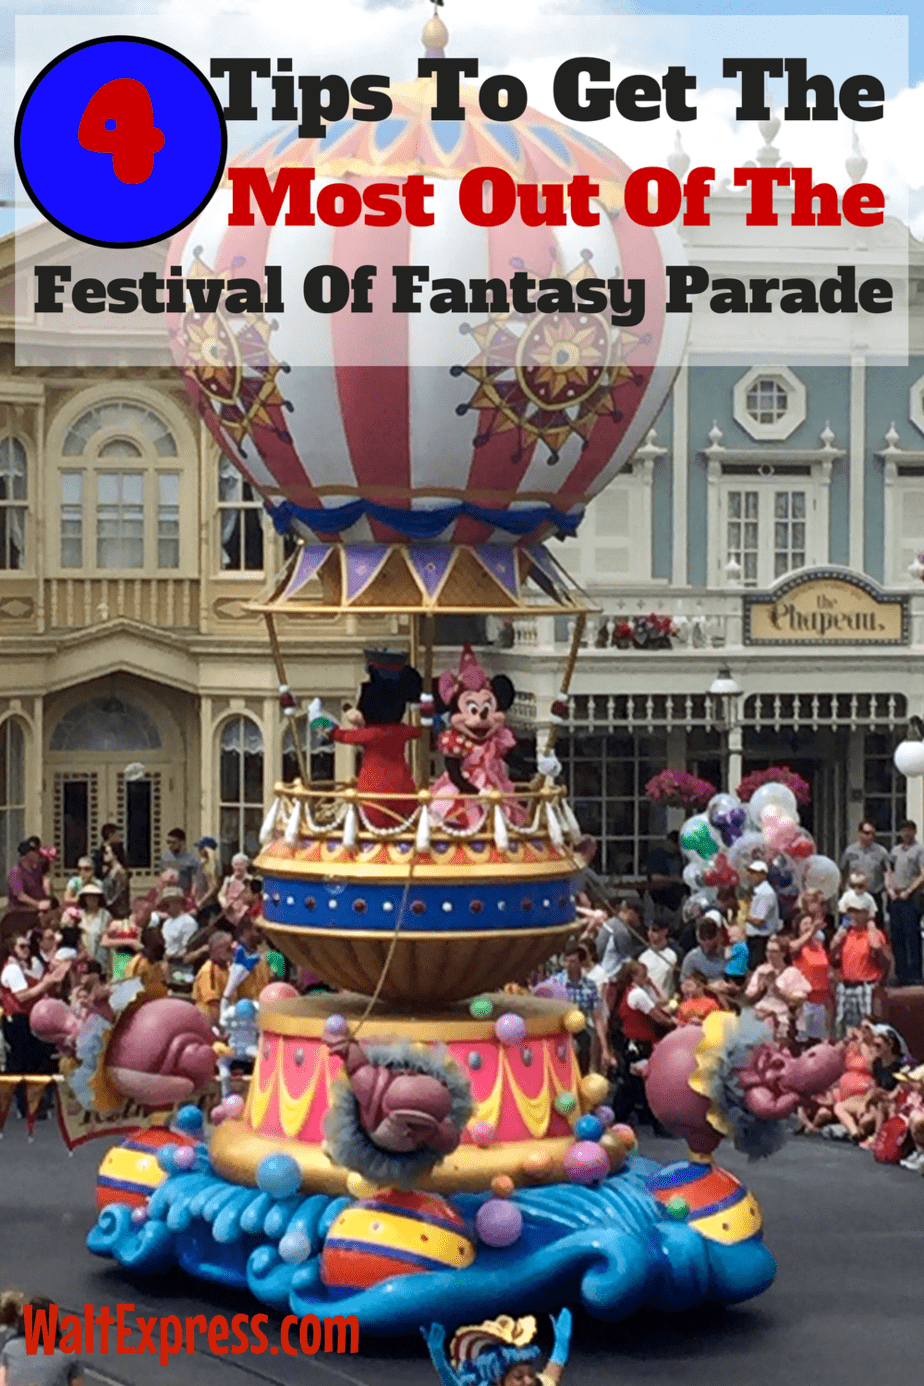  4 Tips To Get The Most Out Of The The Festival Of Fantasy Parade